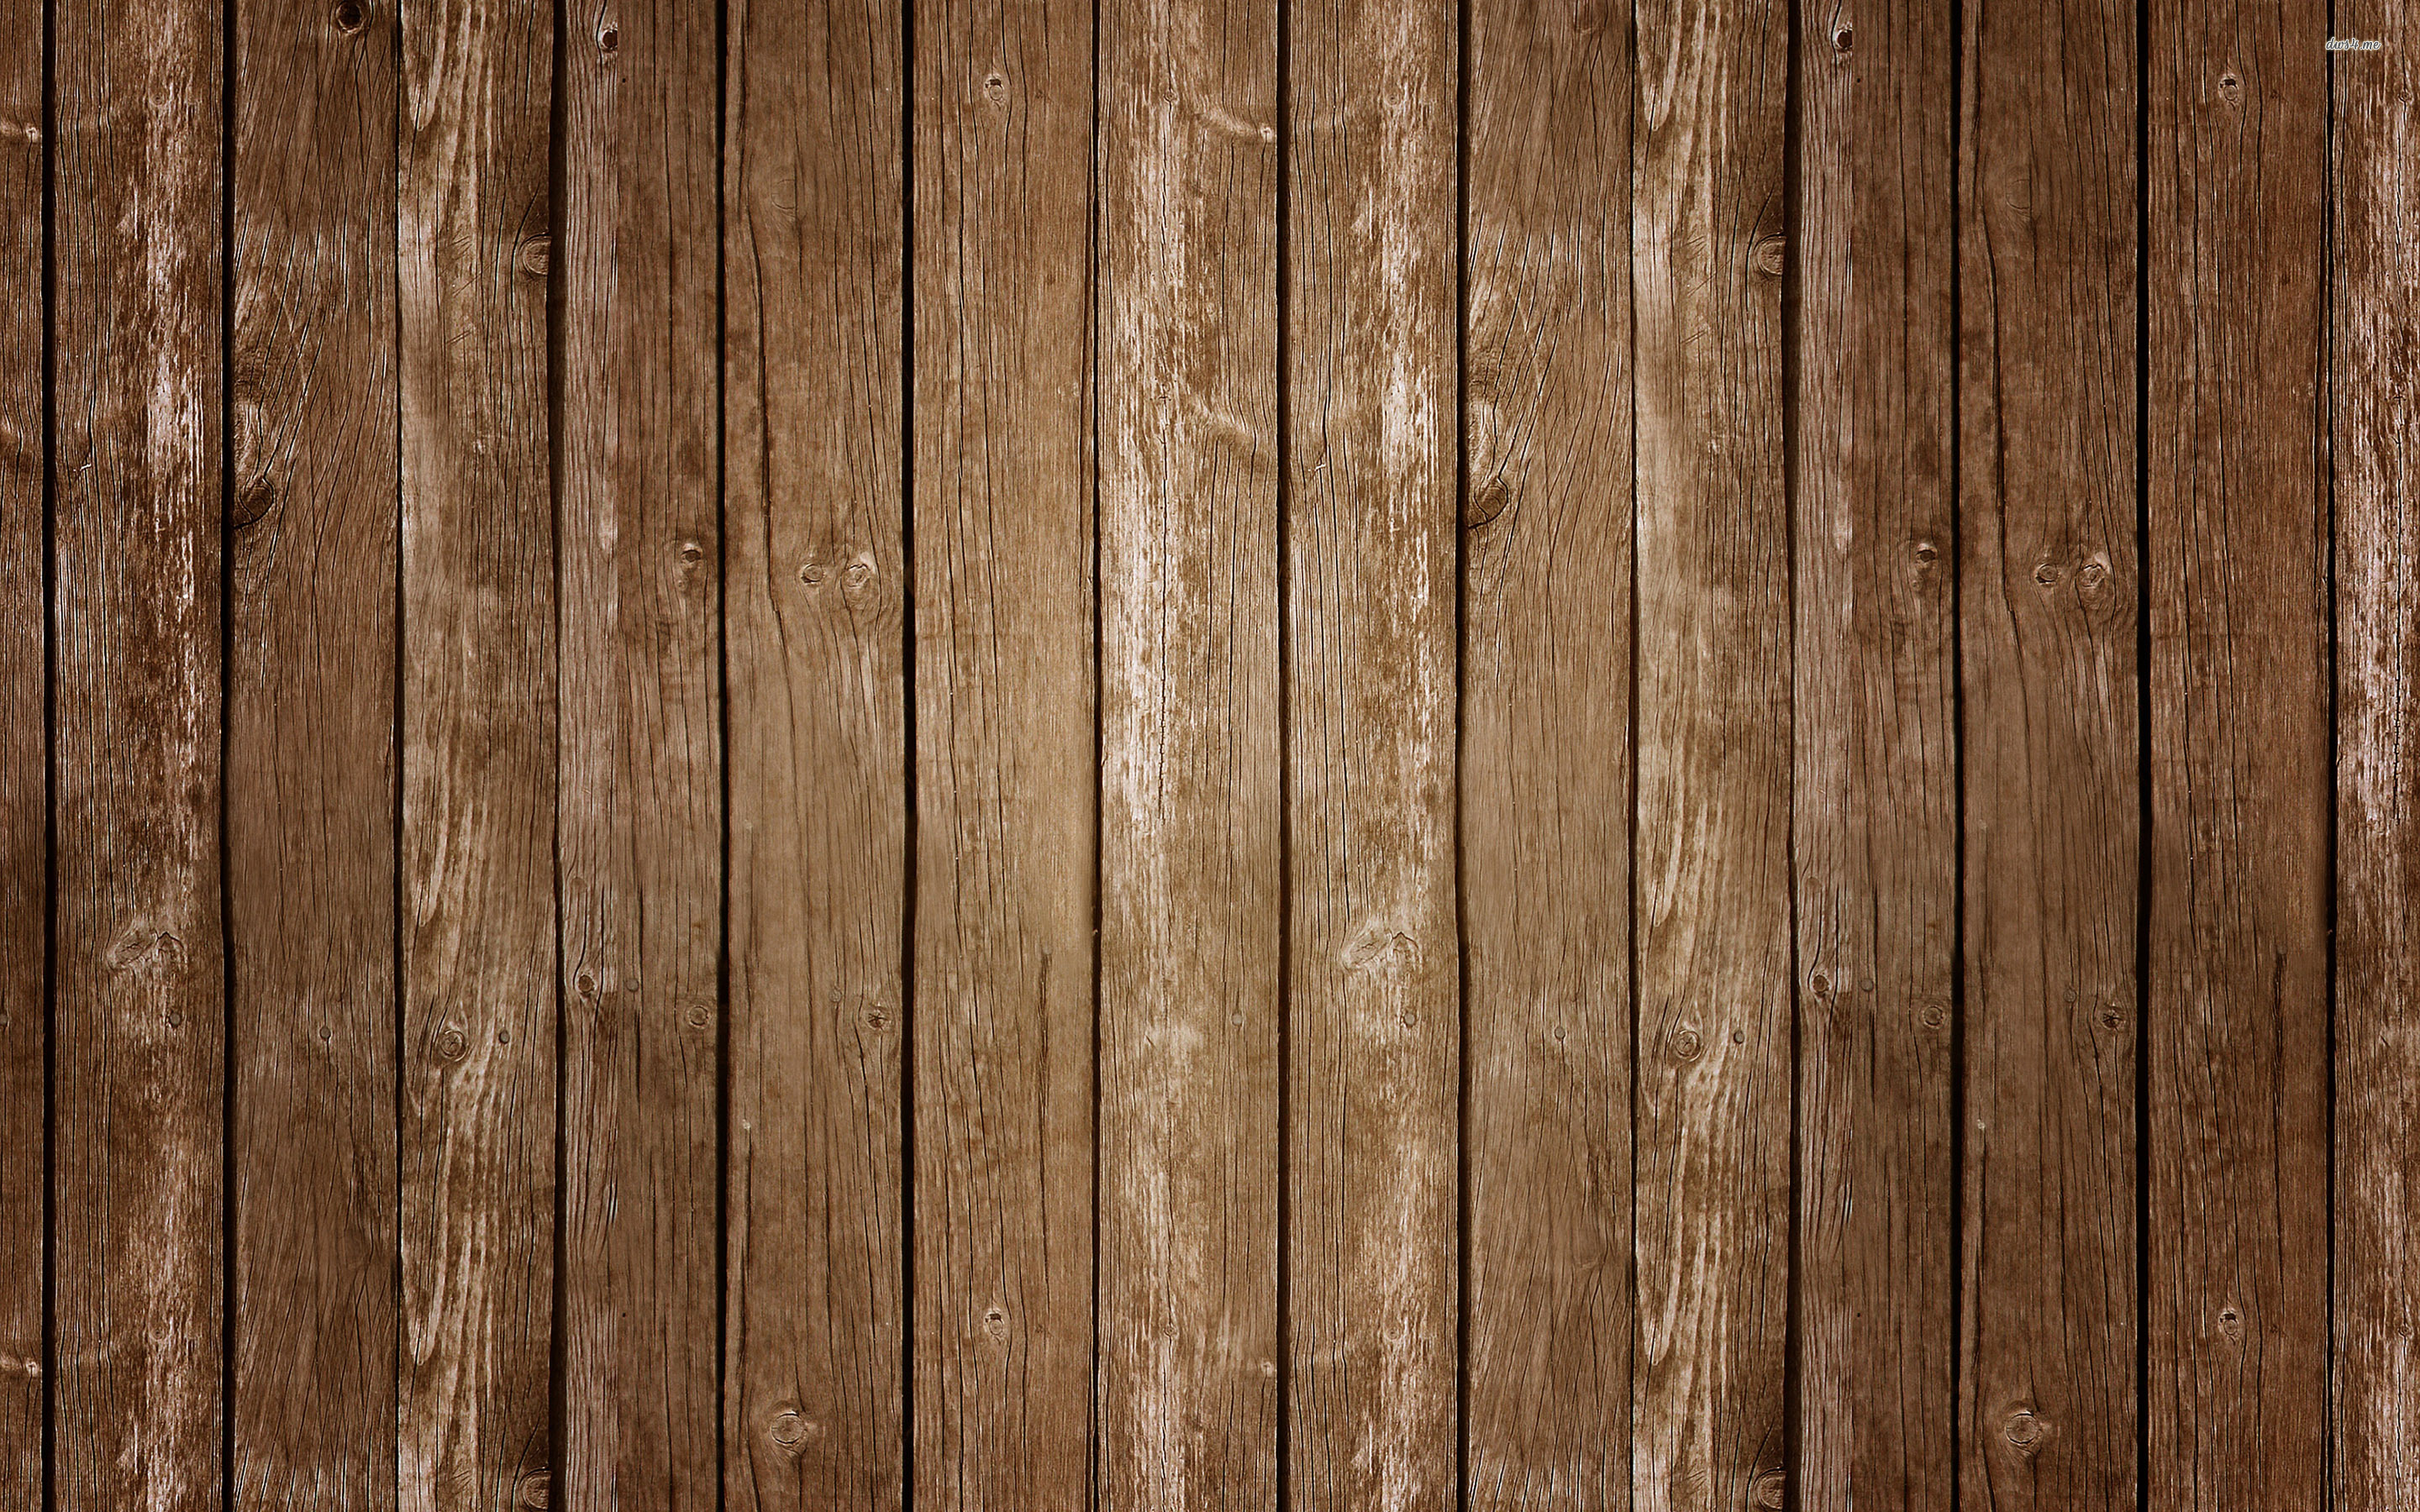 Wood texture wallpaper - Photography wallpapers - #21802